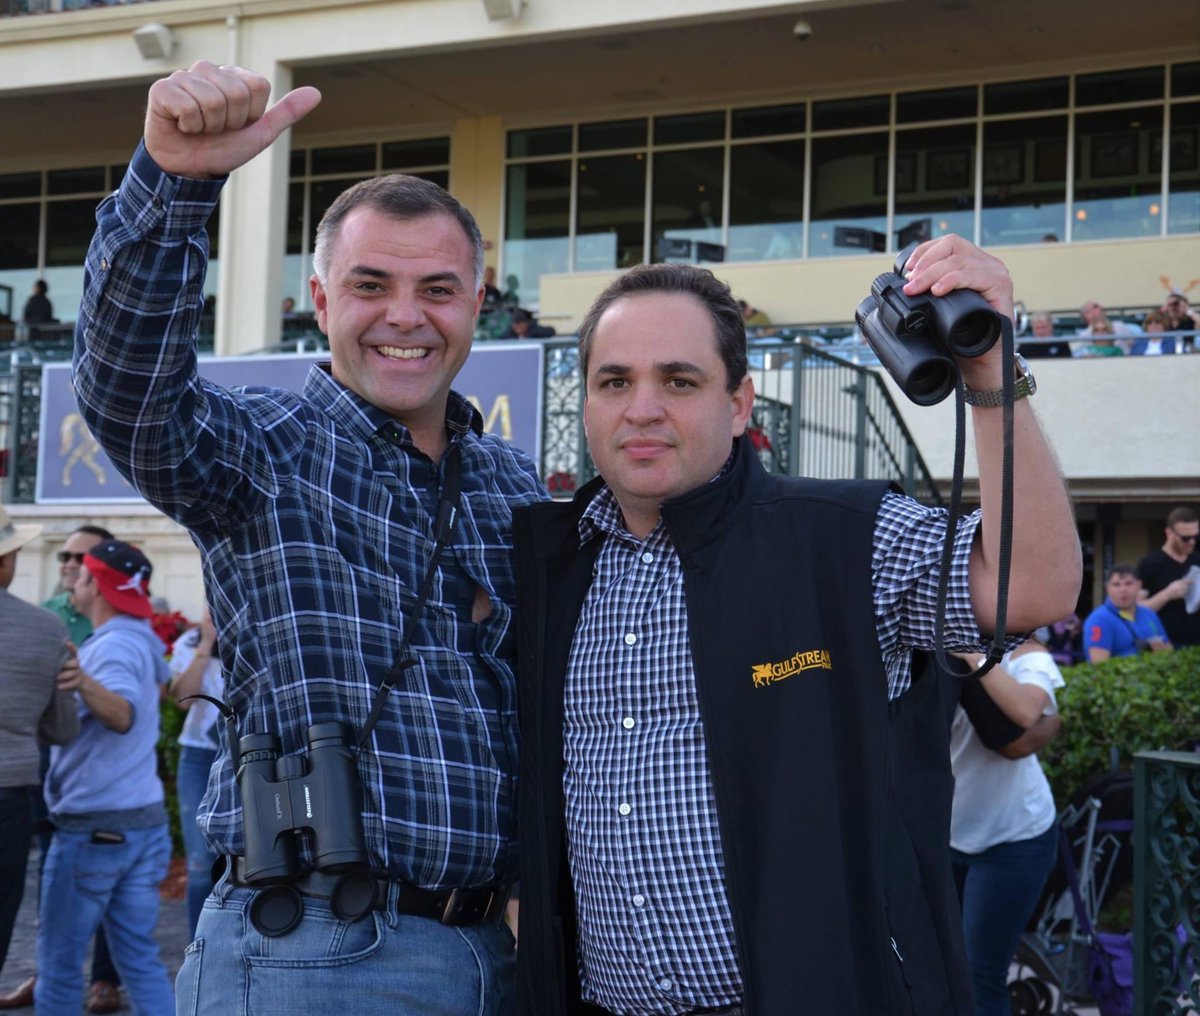 Congratulations @VictorEBarboza on your 5th training title at @GulfstreamPark #sunshinemeet 2023